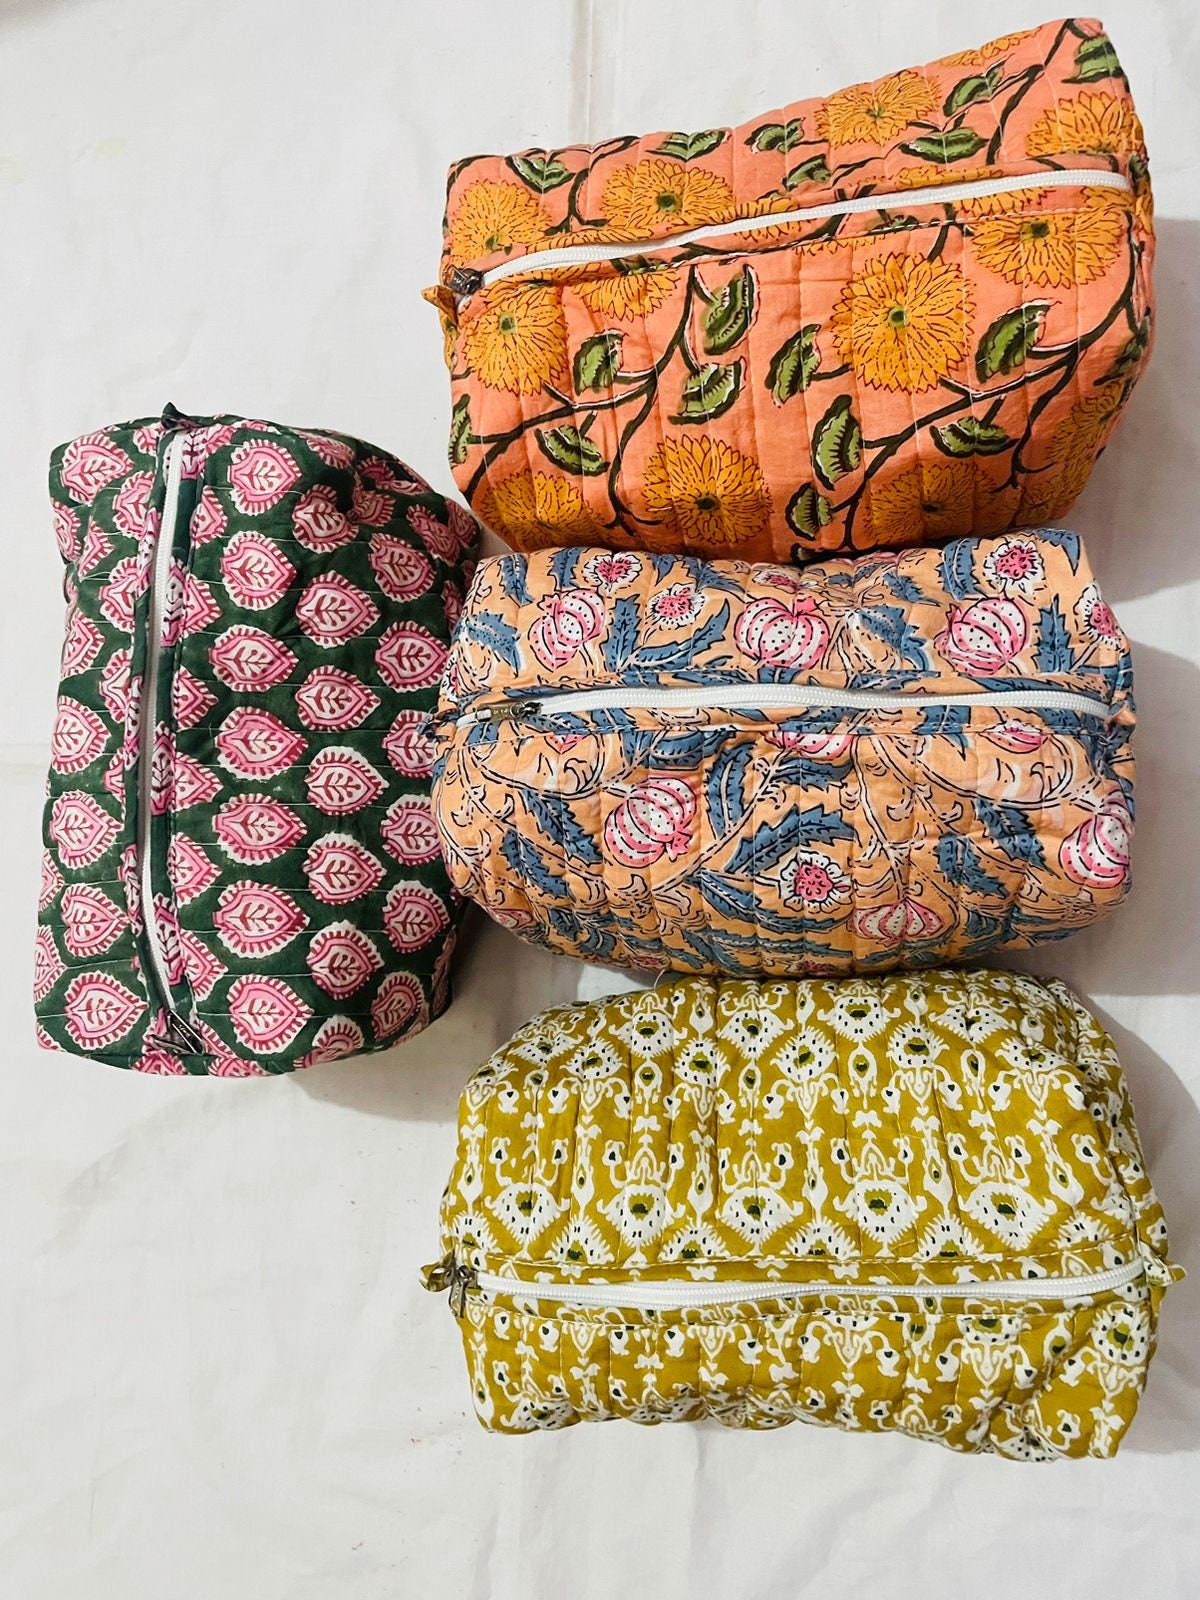 Tulip Rain ~ Quilted Toiletries and Makeup Bag in Cotton (Set of 3in) by Saffron Marigold